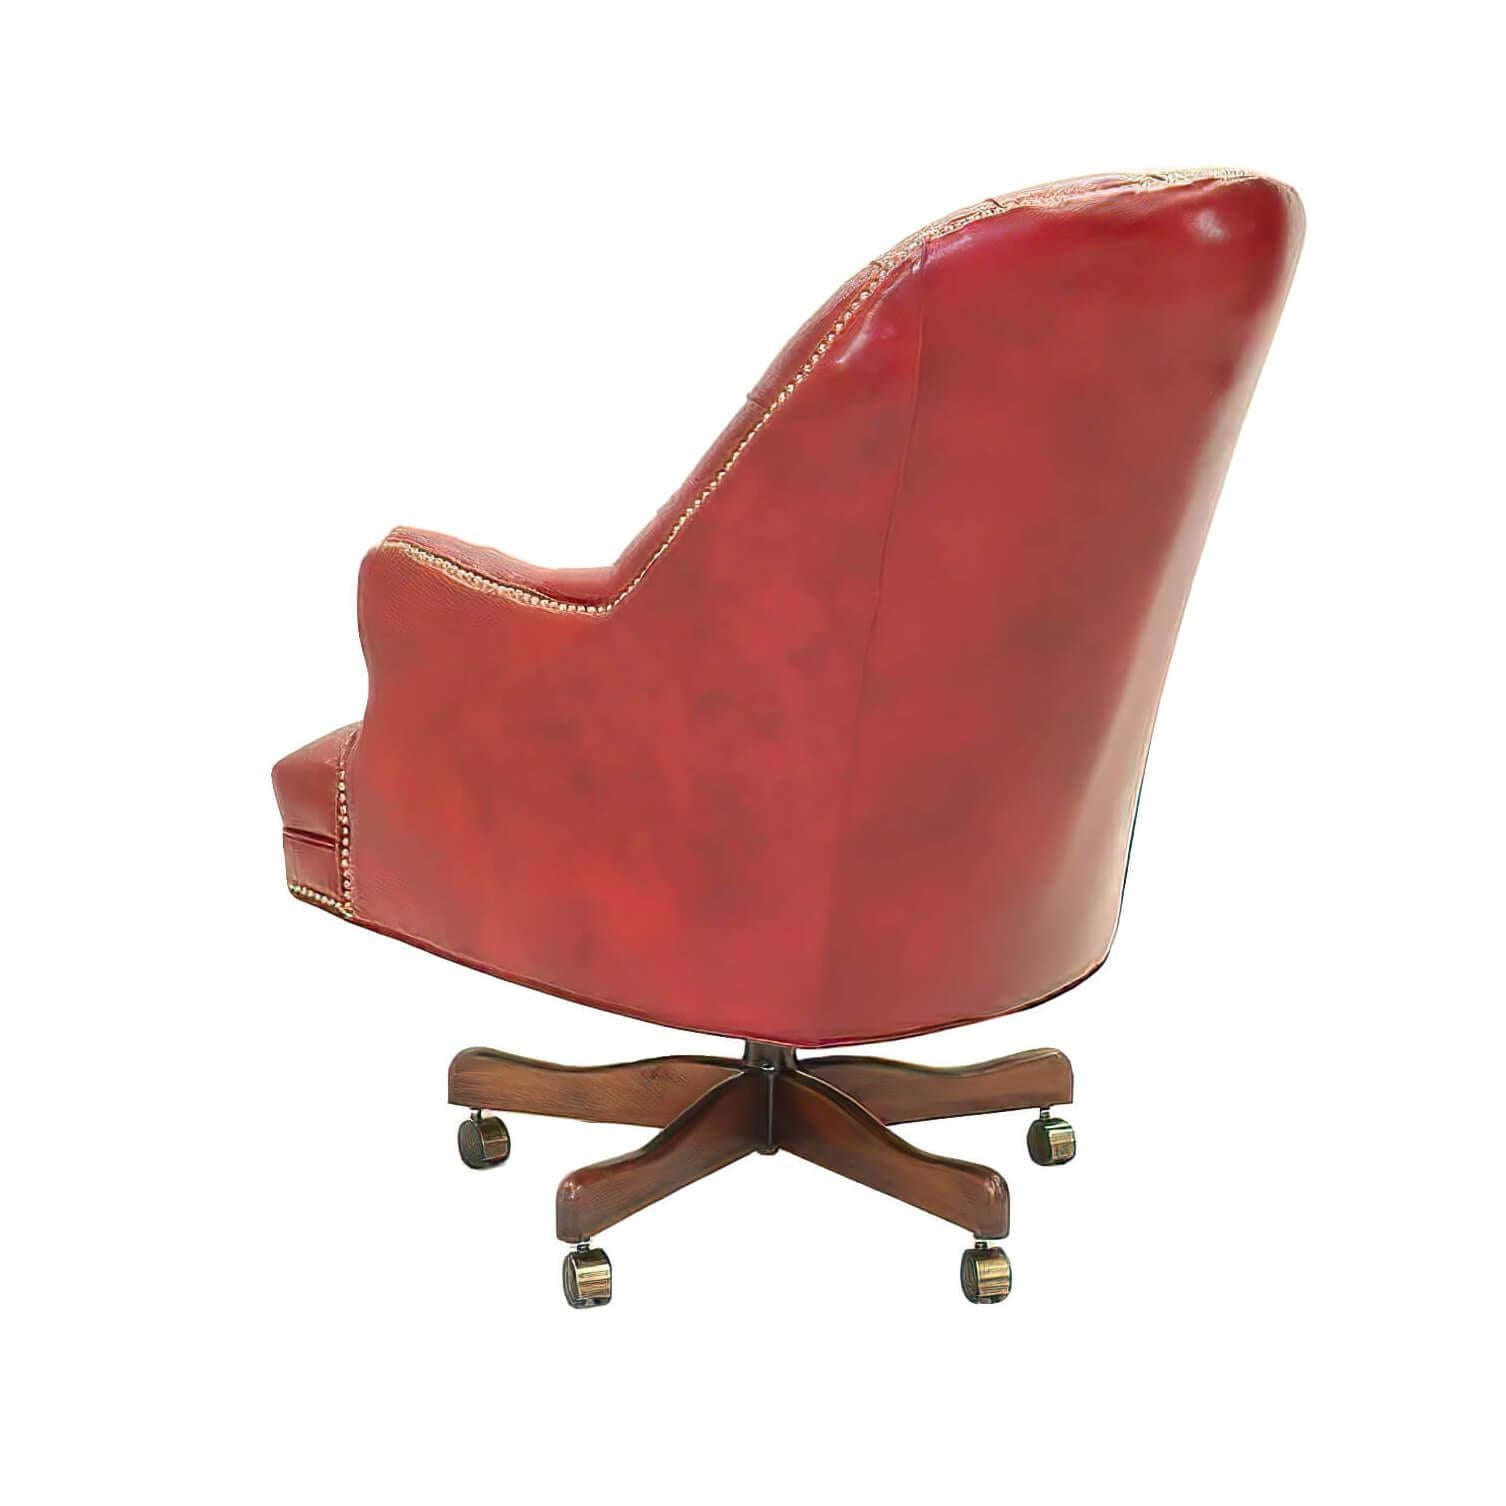 A fine customizable English style tufted Barrel back desk chair with tufted back and seat, an arched backrest with padded and upholstered arms, a shaped front rail with brass nailhead finishing details, a hydraulic lift to raise the seat and a